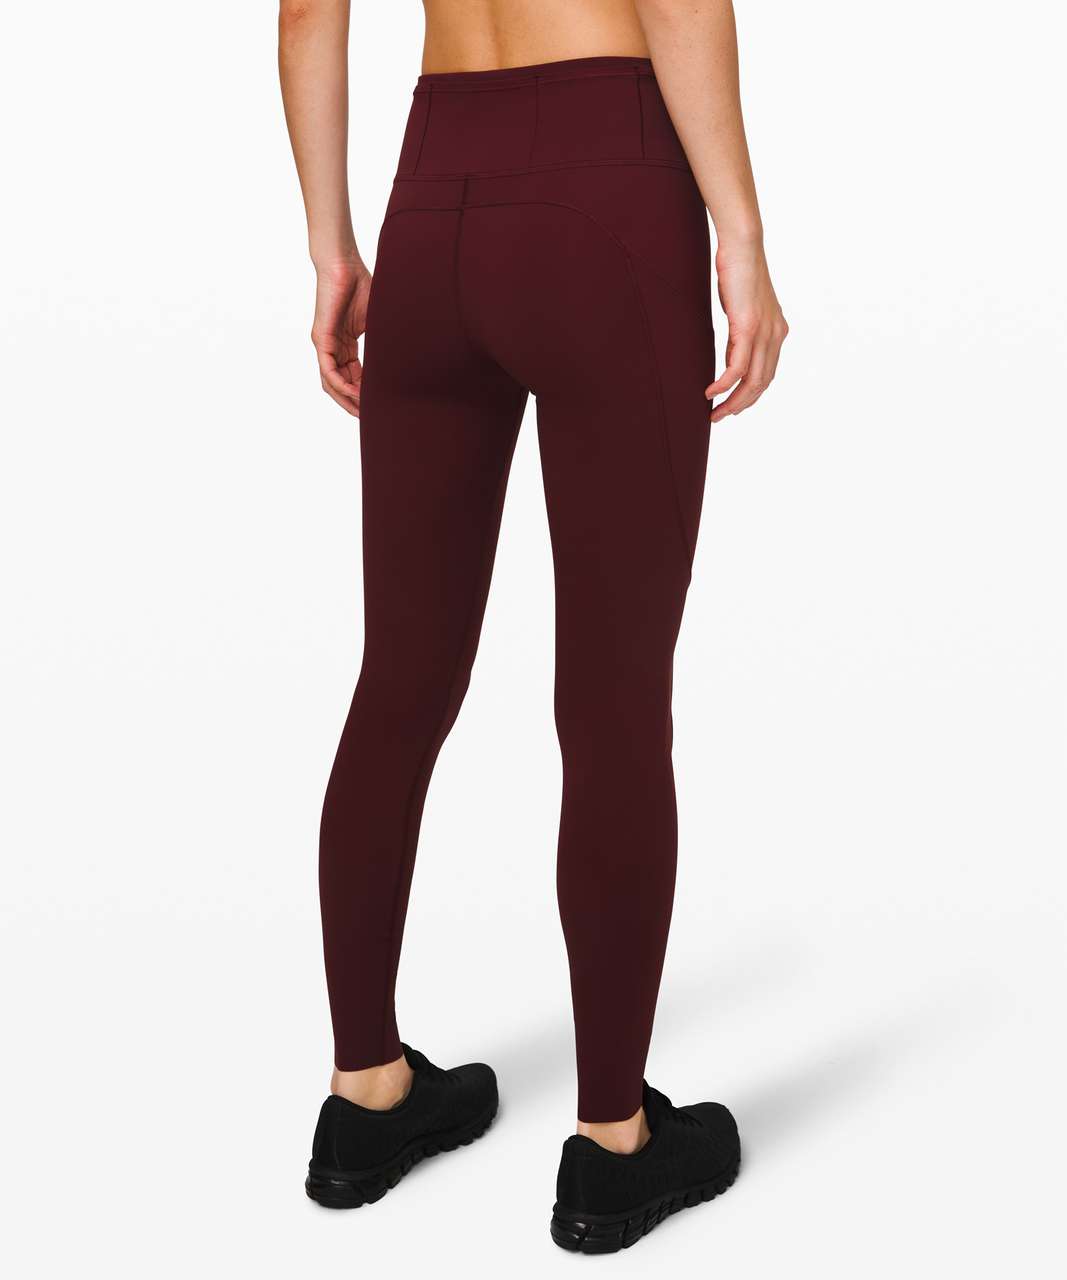 Lululemon Fast and Free Tight 28" *Non-Reflective - Garnet